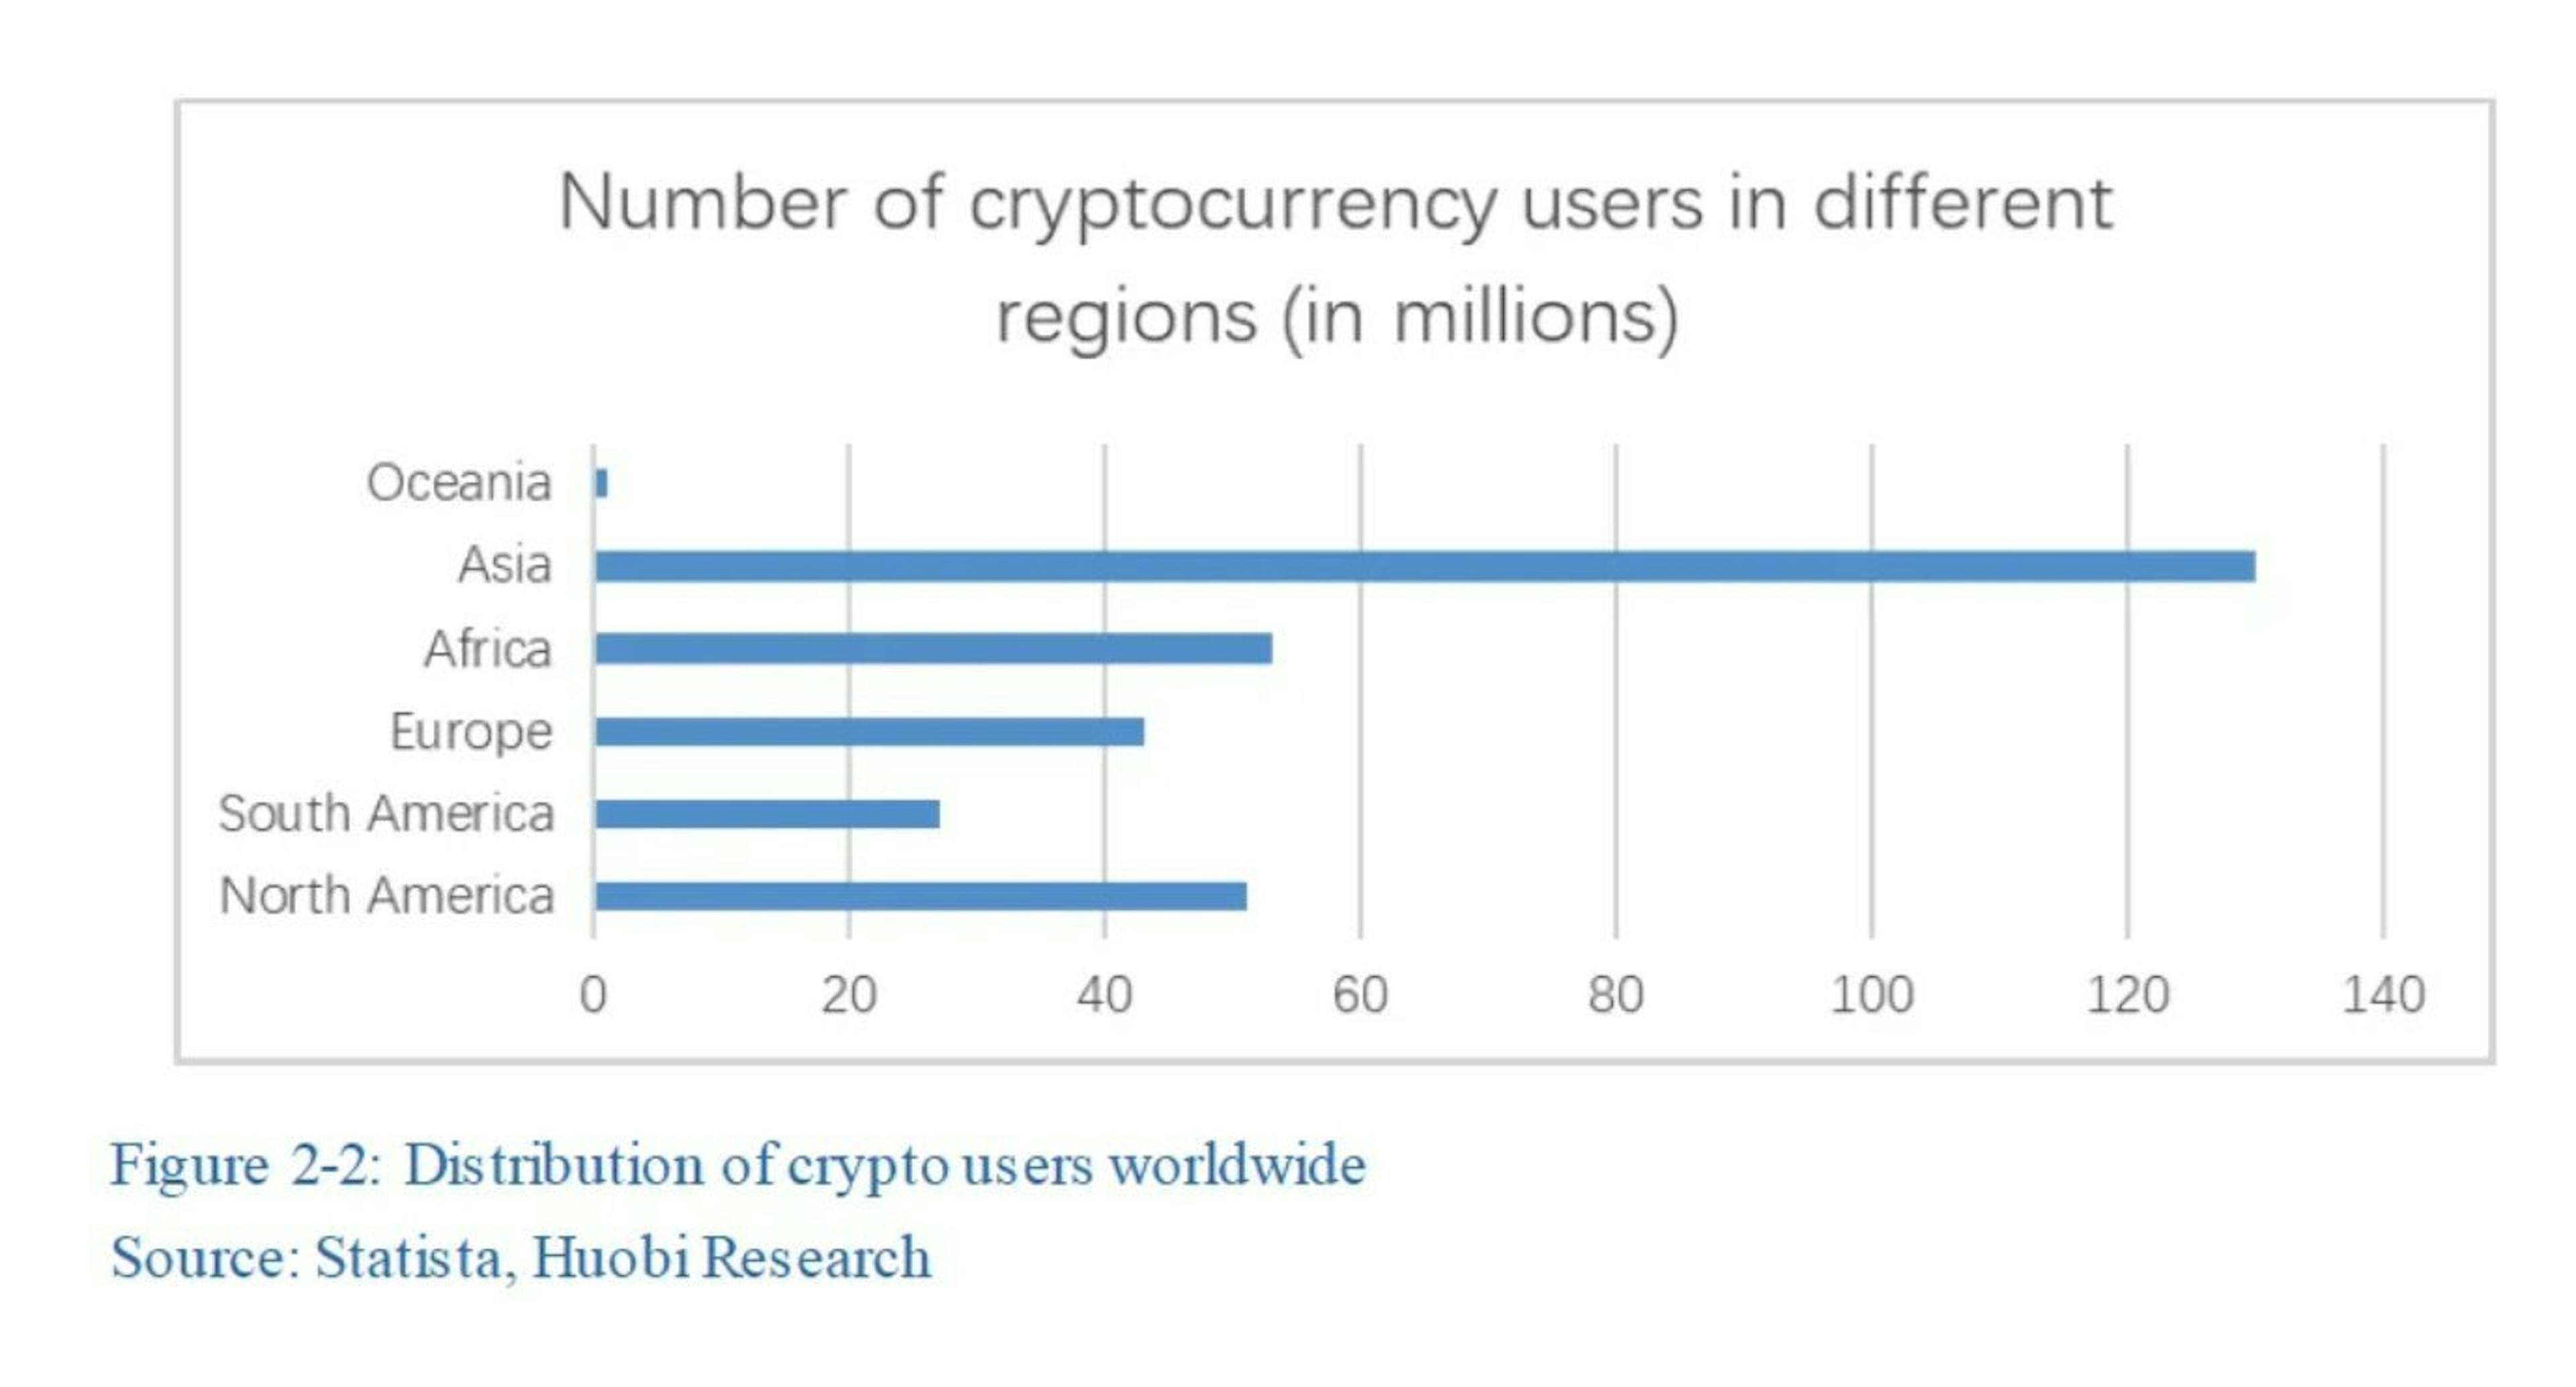 Number of crypto users in different regions